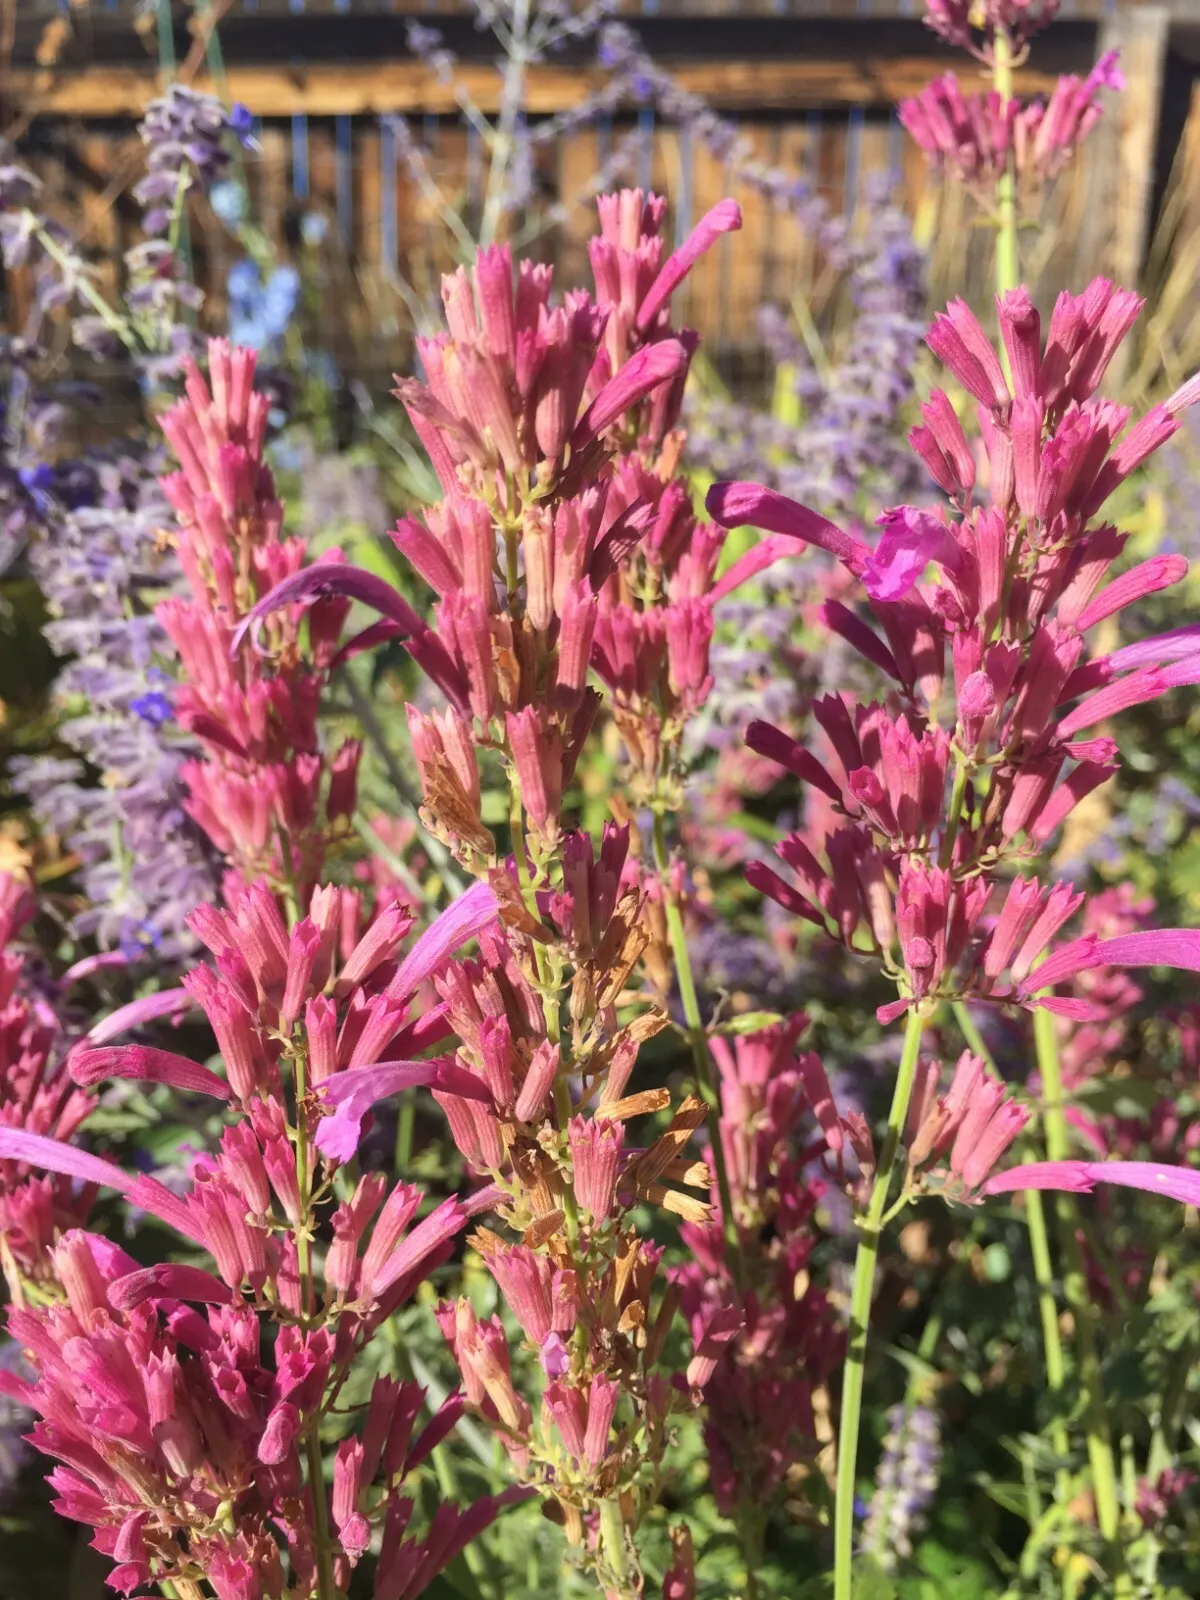  100 seeds Agastache Pink Perennial Organic From US - $10.00